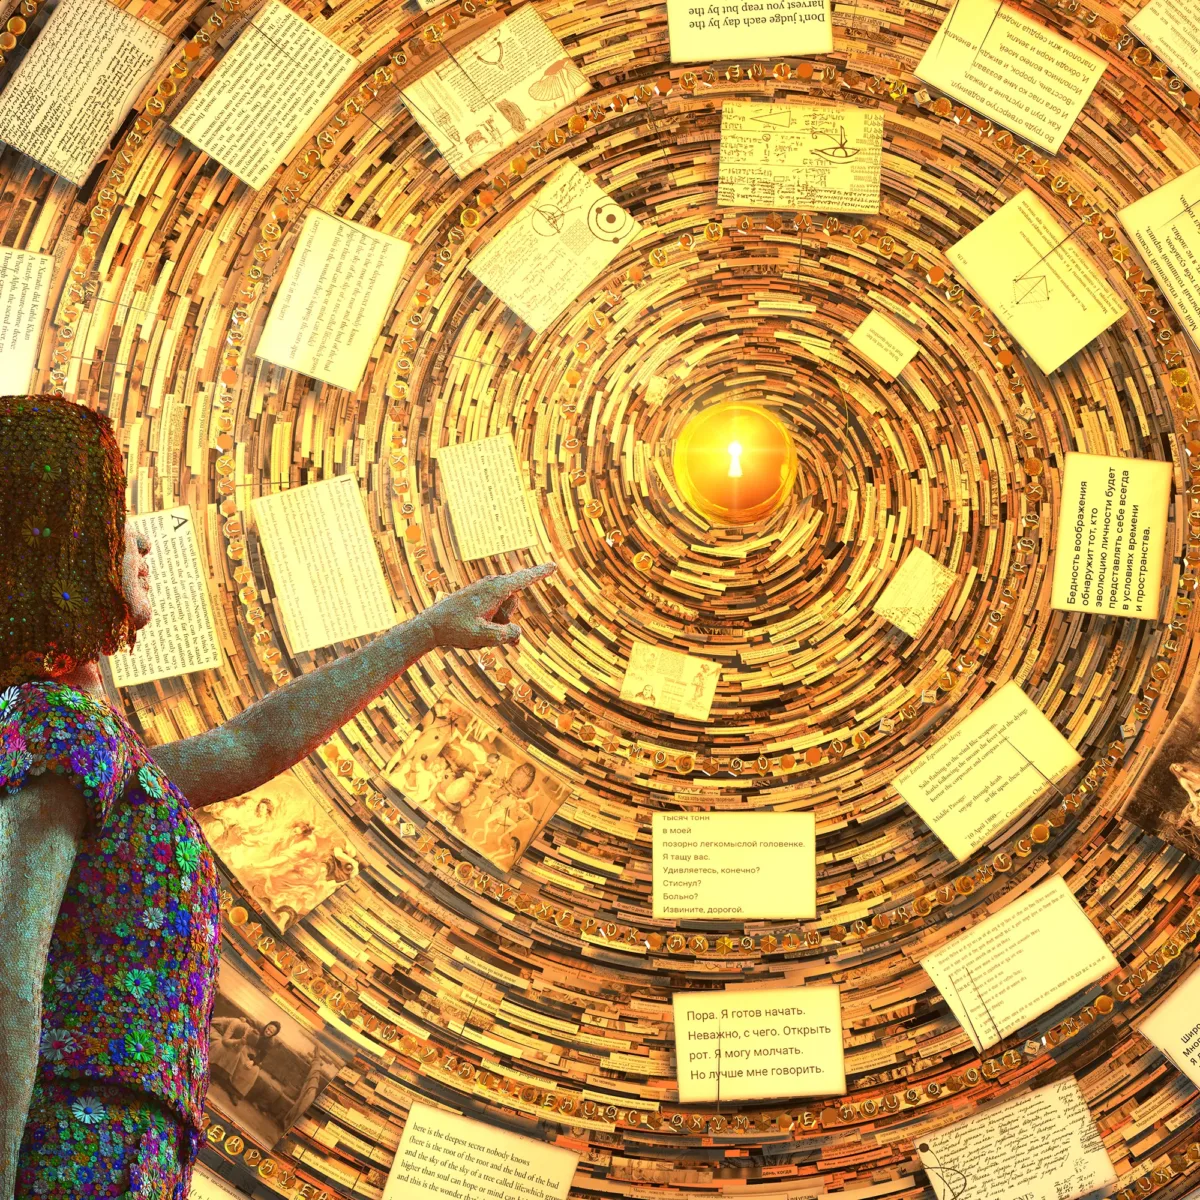 A girl surrounded by statues of wise men stands on a stack of books pointing to a small sun around which pages from Russian scientific and philosophical books rotate. She holding a teddy bear in her hand.